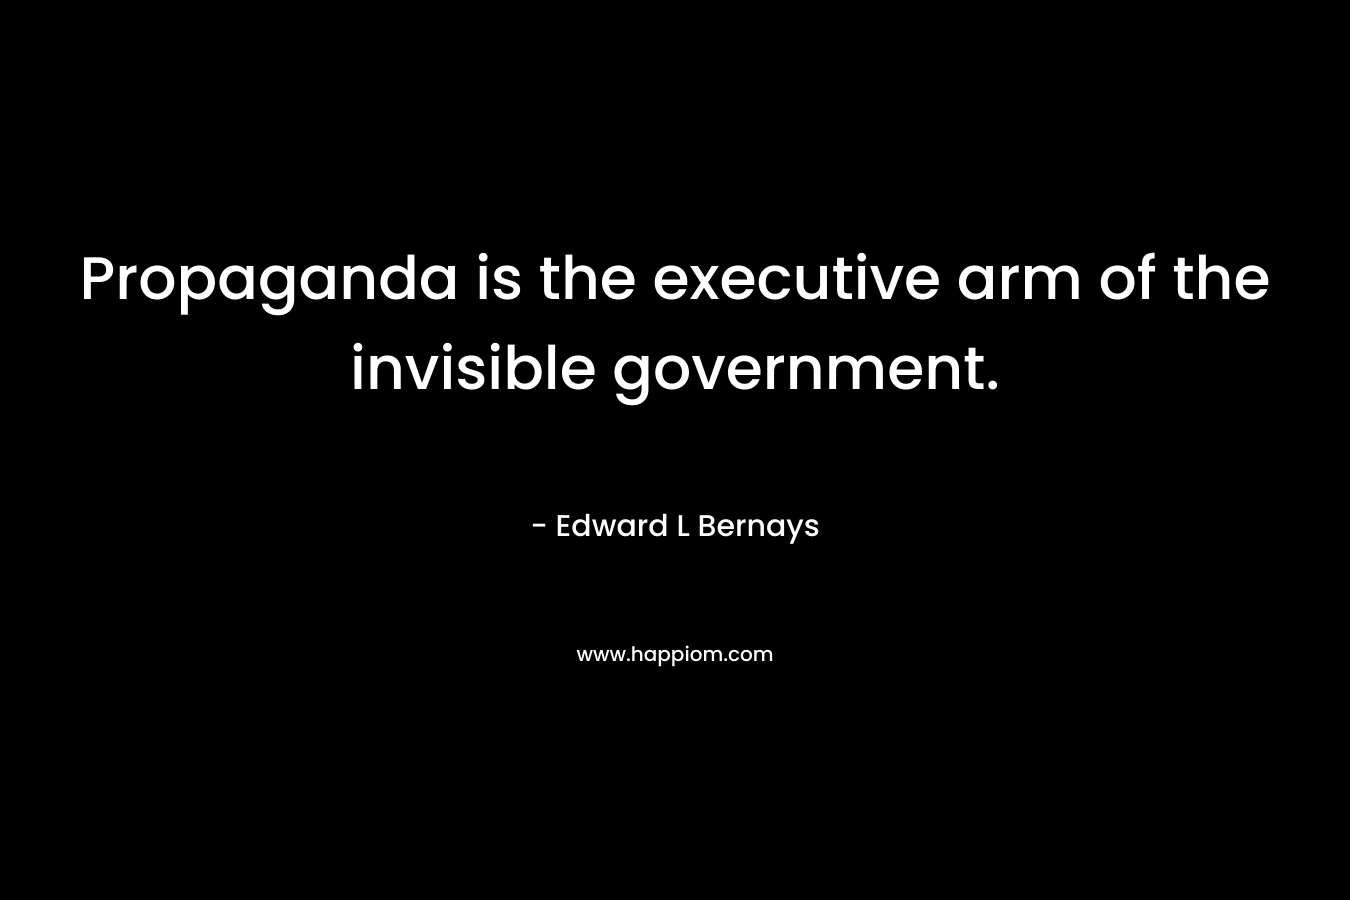 Propaganda is the executive arm of the invisible government. – Edward L Bernays